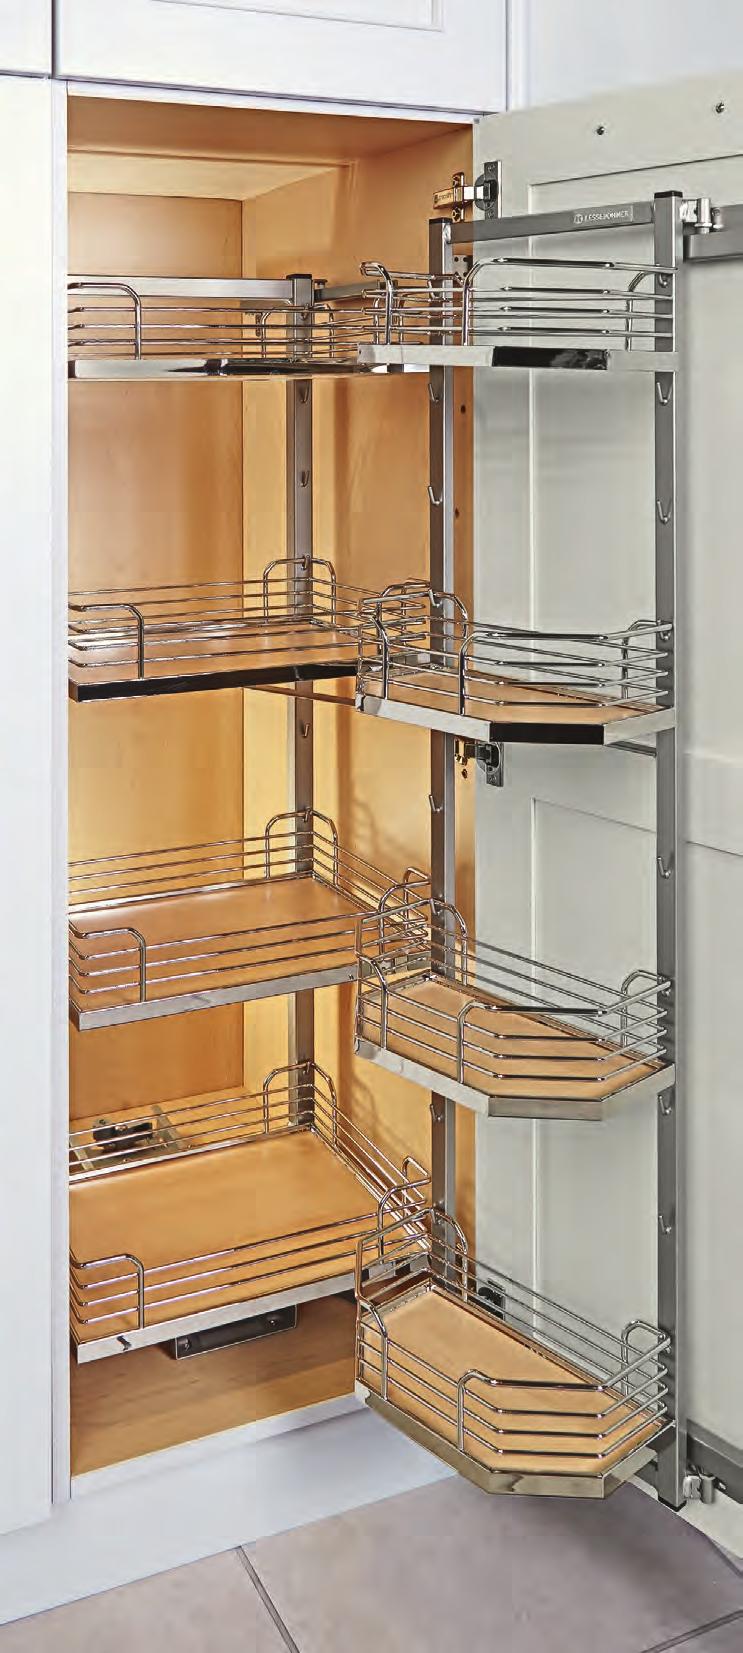 TANDEM PANTRY Technical Information B B ARENA champagne/maple Notes: works with overlay and inset doors shelves should be positioned above or below door hinges minimum internal height 60" for